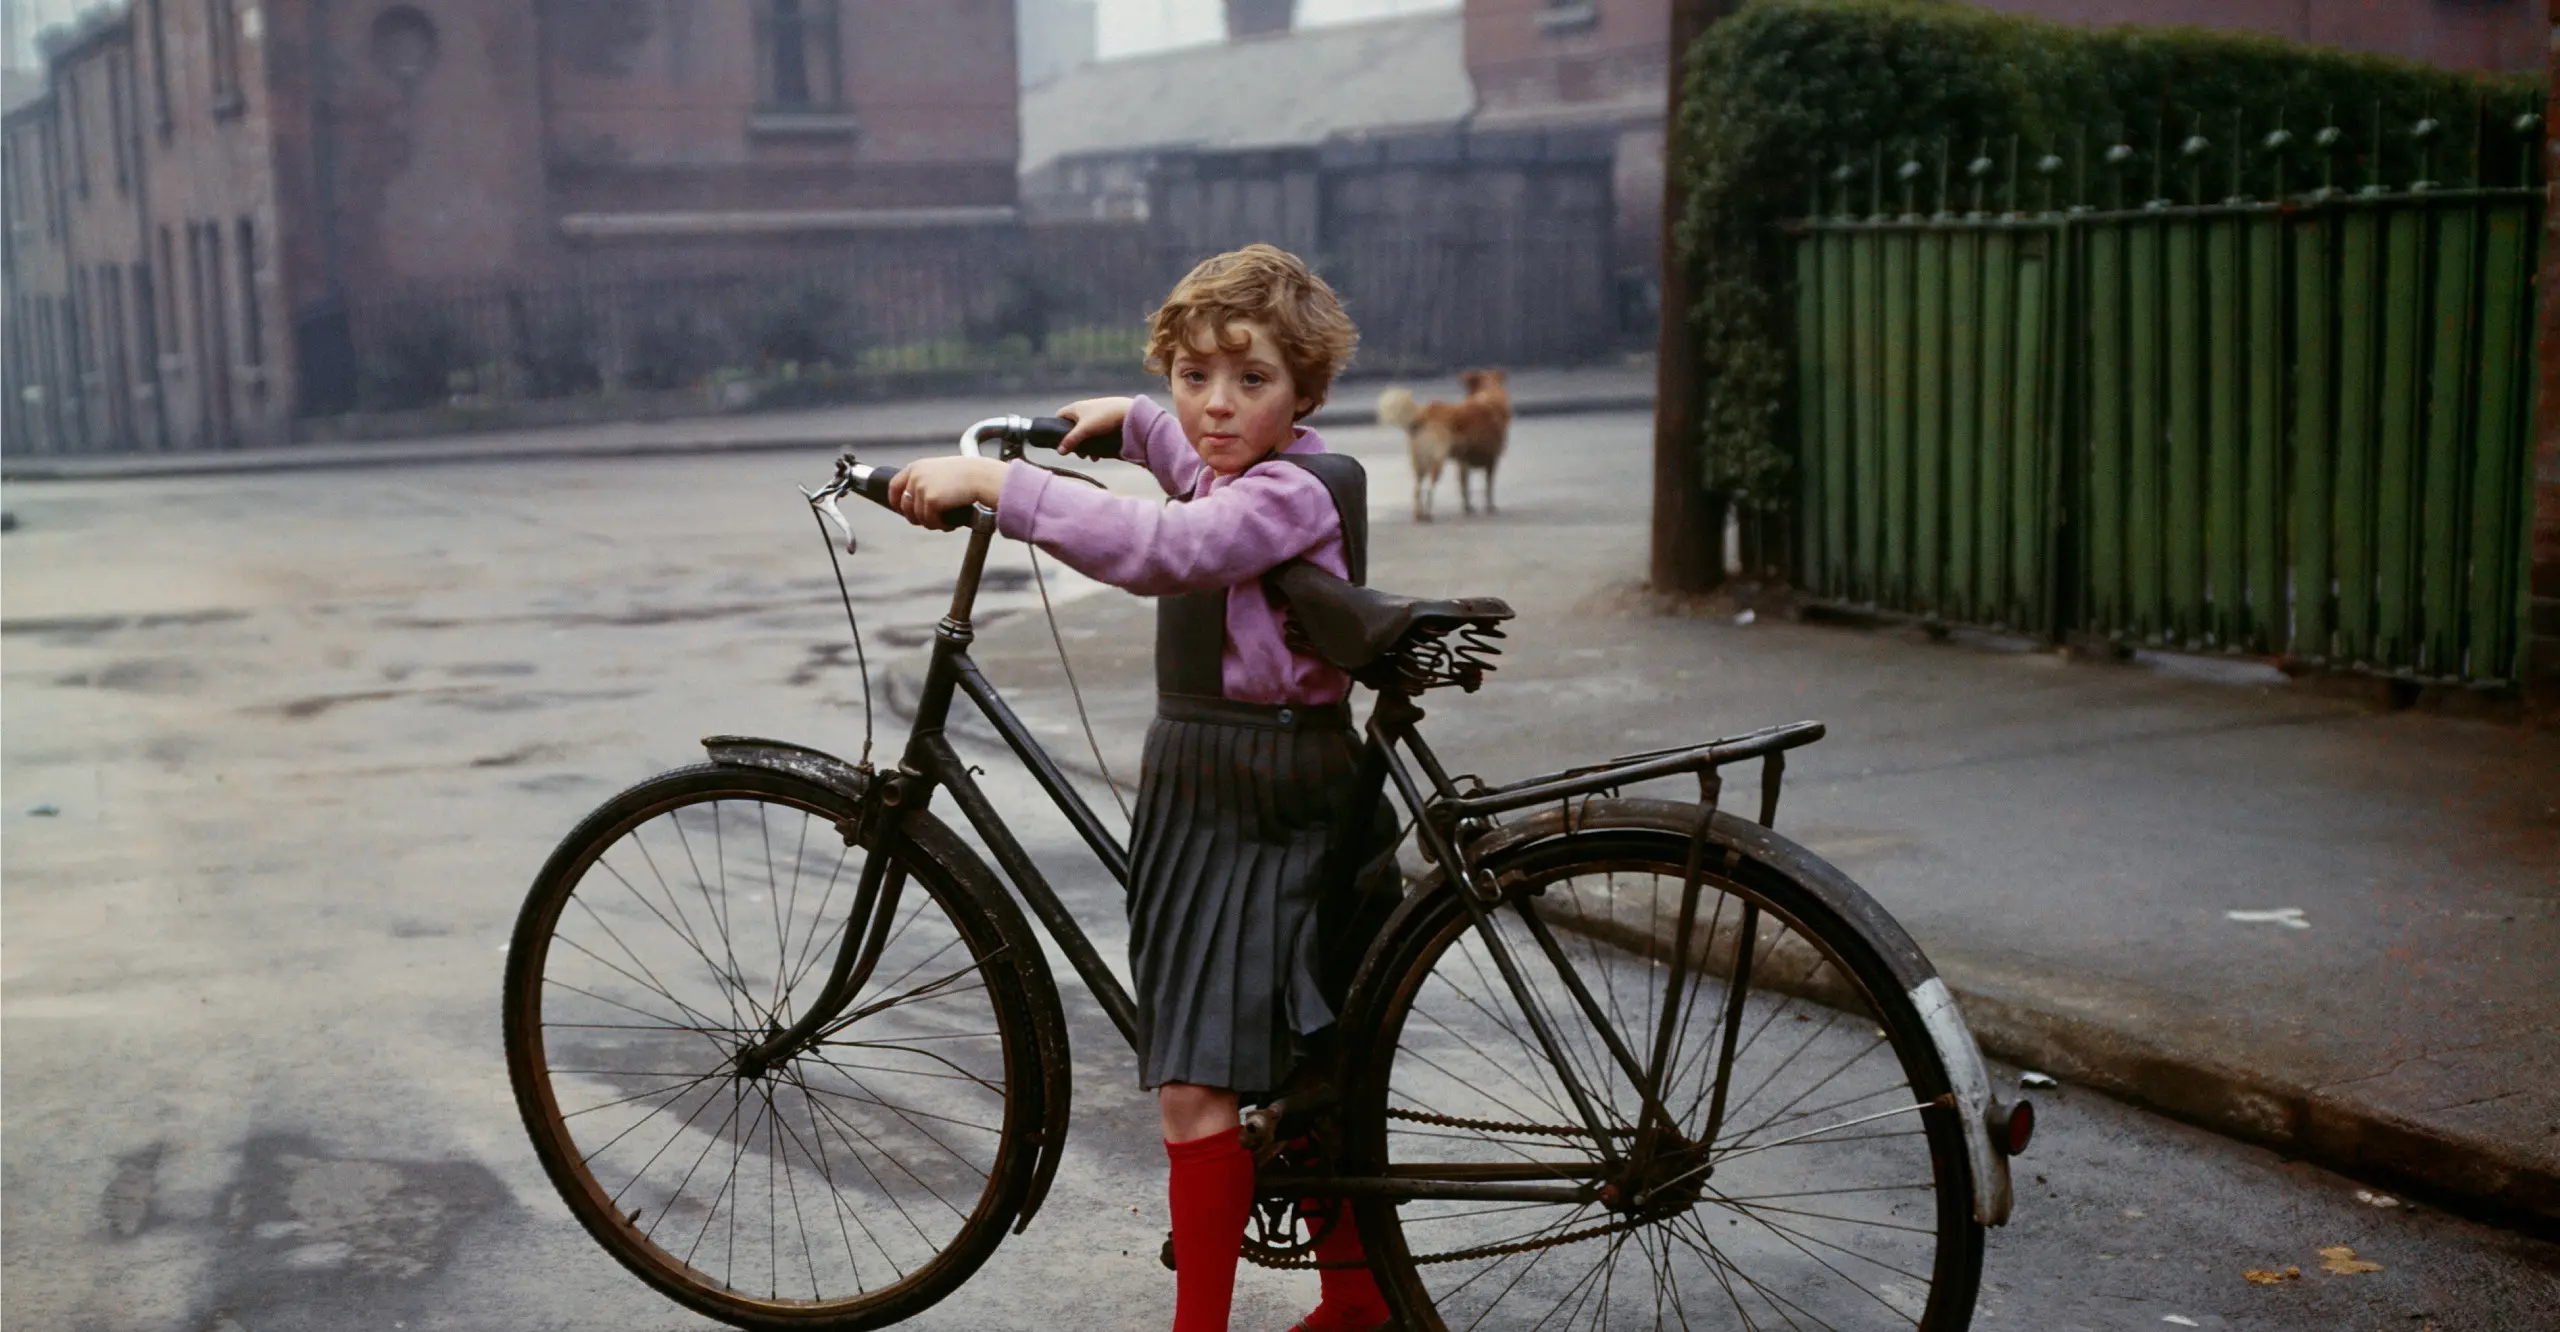 Colour photograph of a young girl standing with a large bicycle, looking directly at the camera. There is a street scene behind her and a small dog on the corner of the street in the background